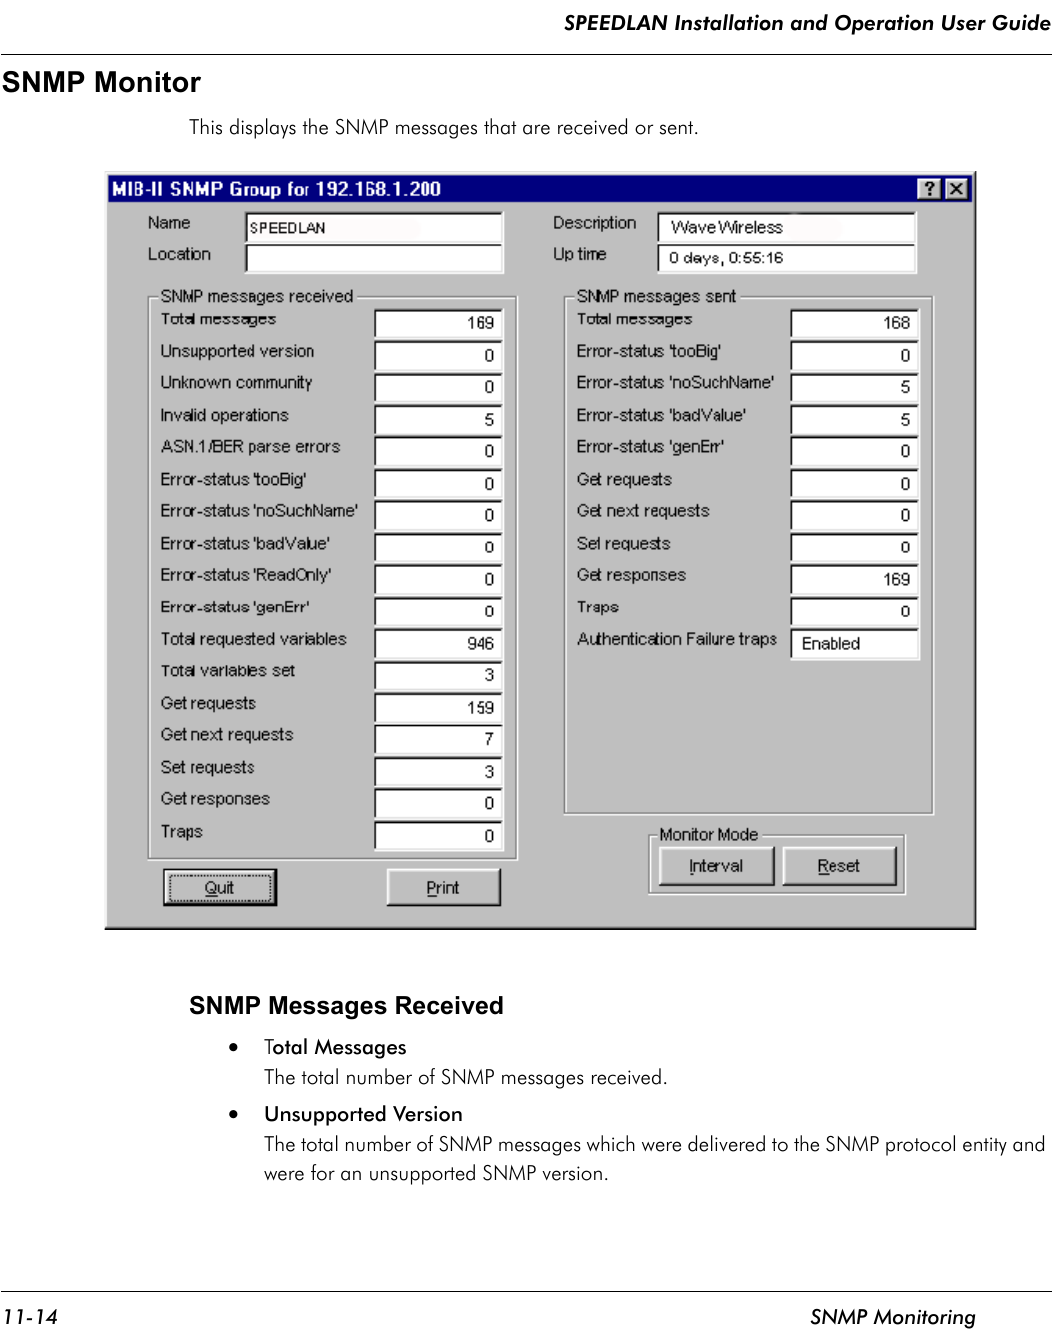 SPEEDLAN Installation and Operation User Guide 11-14 SNMP MonitoringSNMP Monitor This displays the SNMP messages that are received or sent.SNMP Messages Received •Total MessagesThe total number of SNMP messages received. •Unsupported VersionThe total number of SNMP messages which were delivered to the SNMP protocol entity and were for an unsupported SNMP version. 